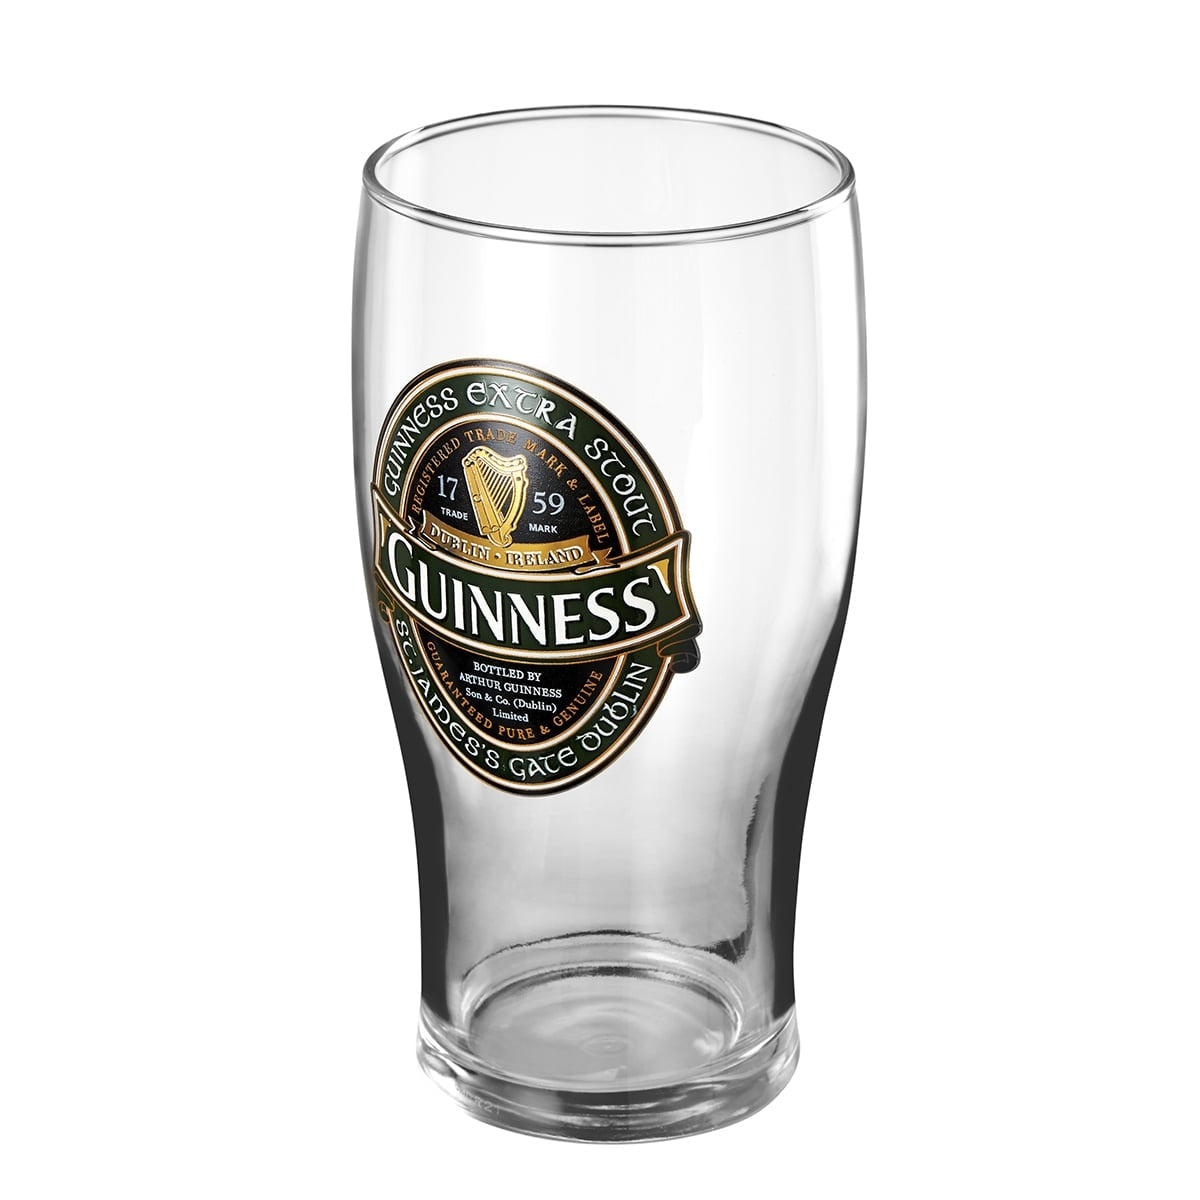 Guinness Ireland Collection Pint Glass - 4 Pack designed by Guinness UK.